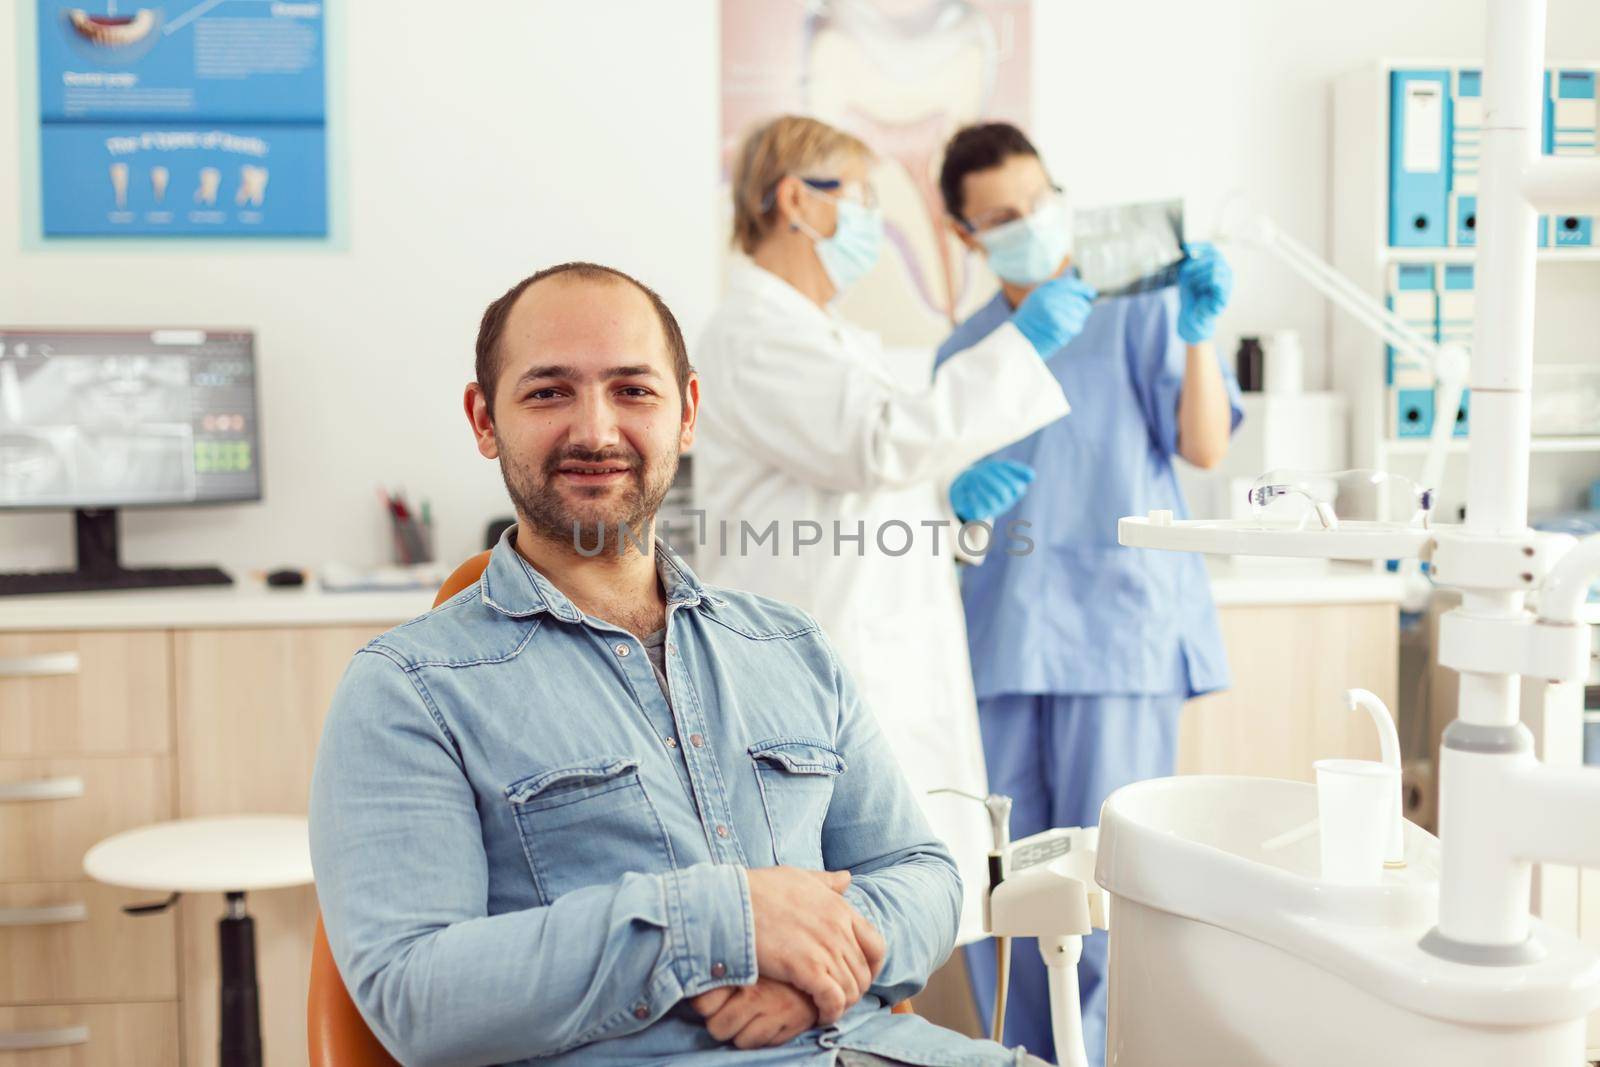 Portrait of man patient sitting on dental chair preparing for stomatology consultation by DCStudio